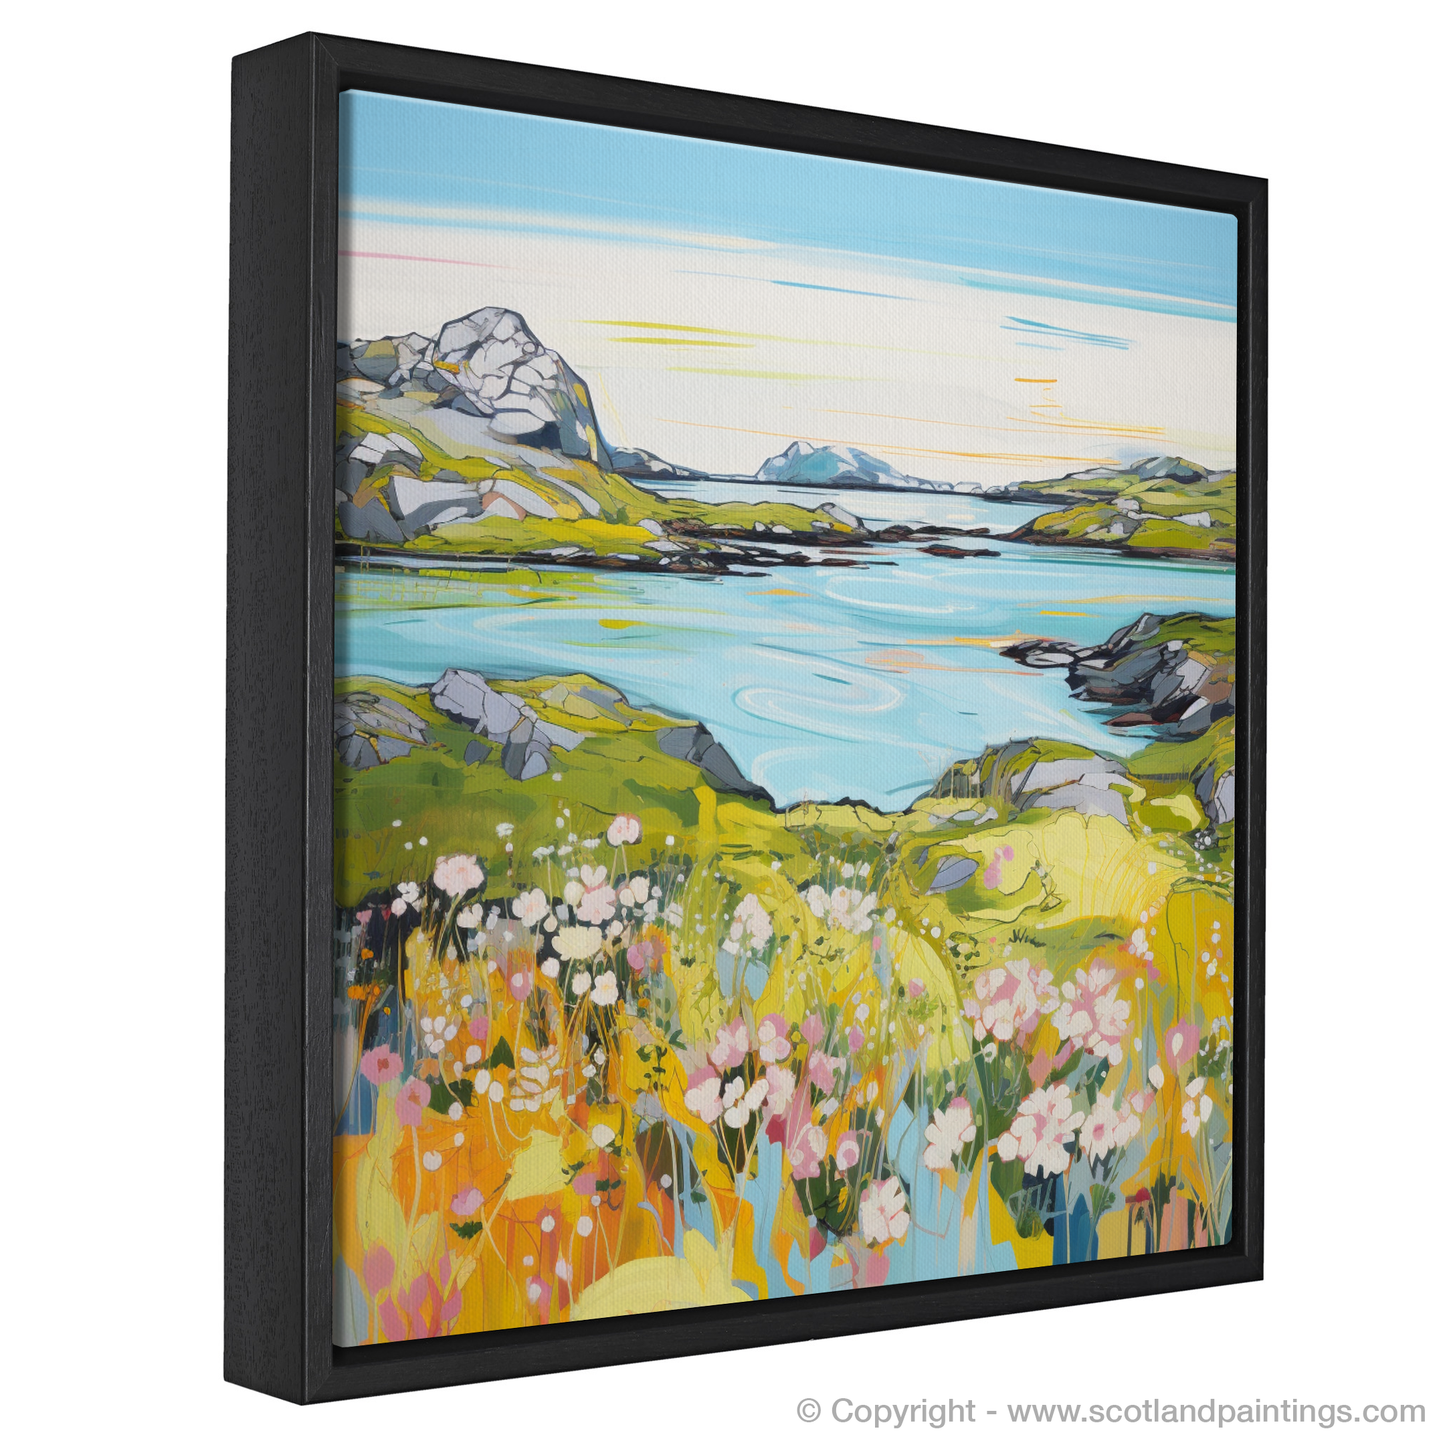 Painting and Art Print of Isle of Scalpay, Outer Hebrides in summer entitled "Summer Splendour of the Isle of Scalpay".